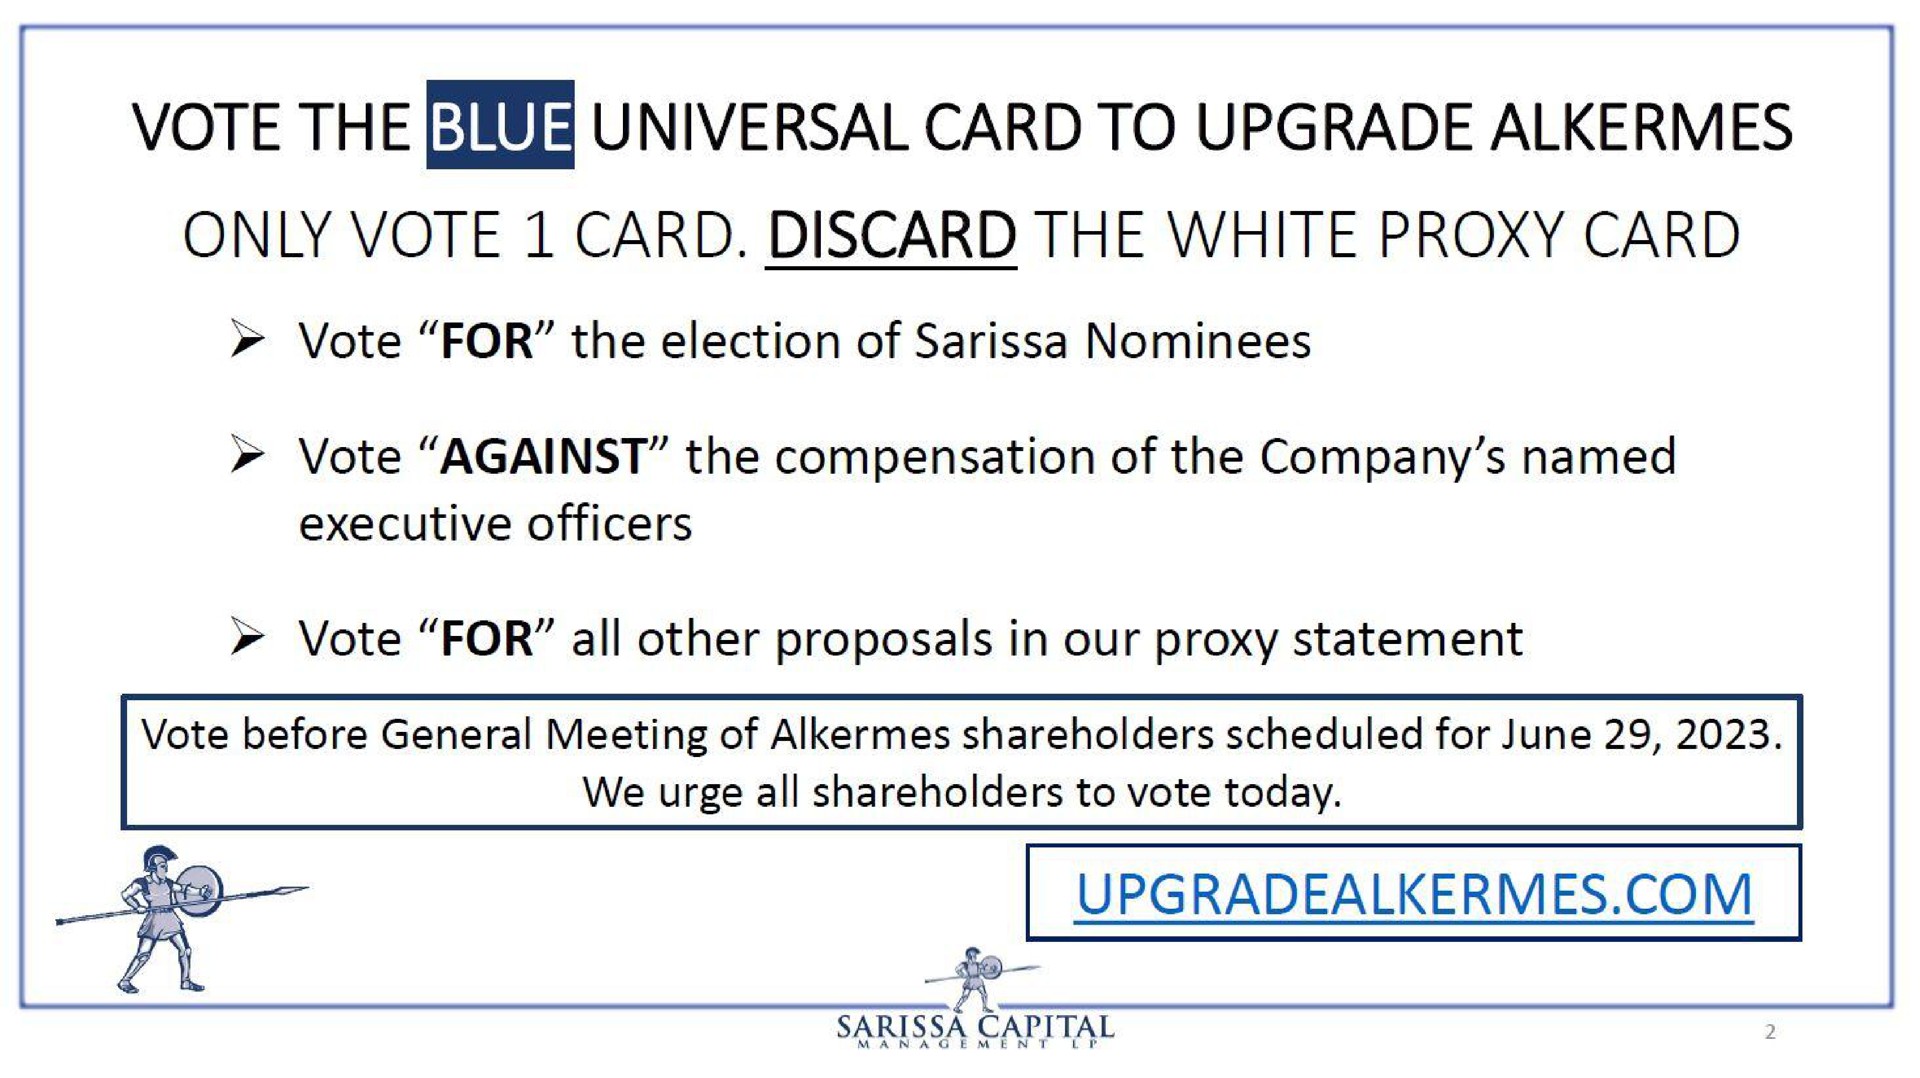 vote the universal card to upgrade alkermes only vote card discard the white proxy card | Sarissa Capital